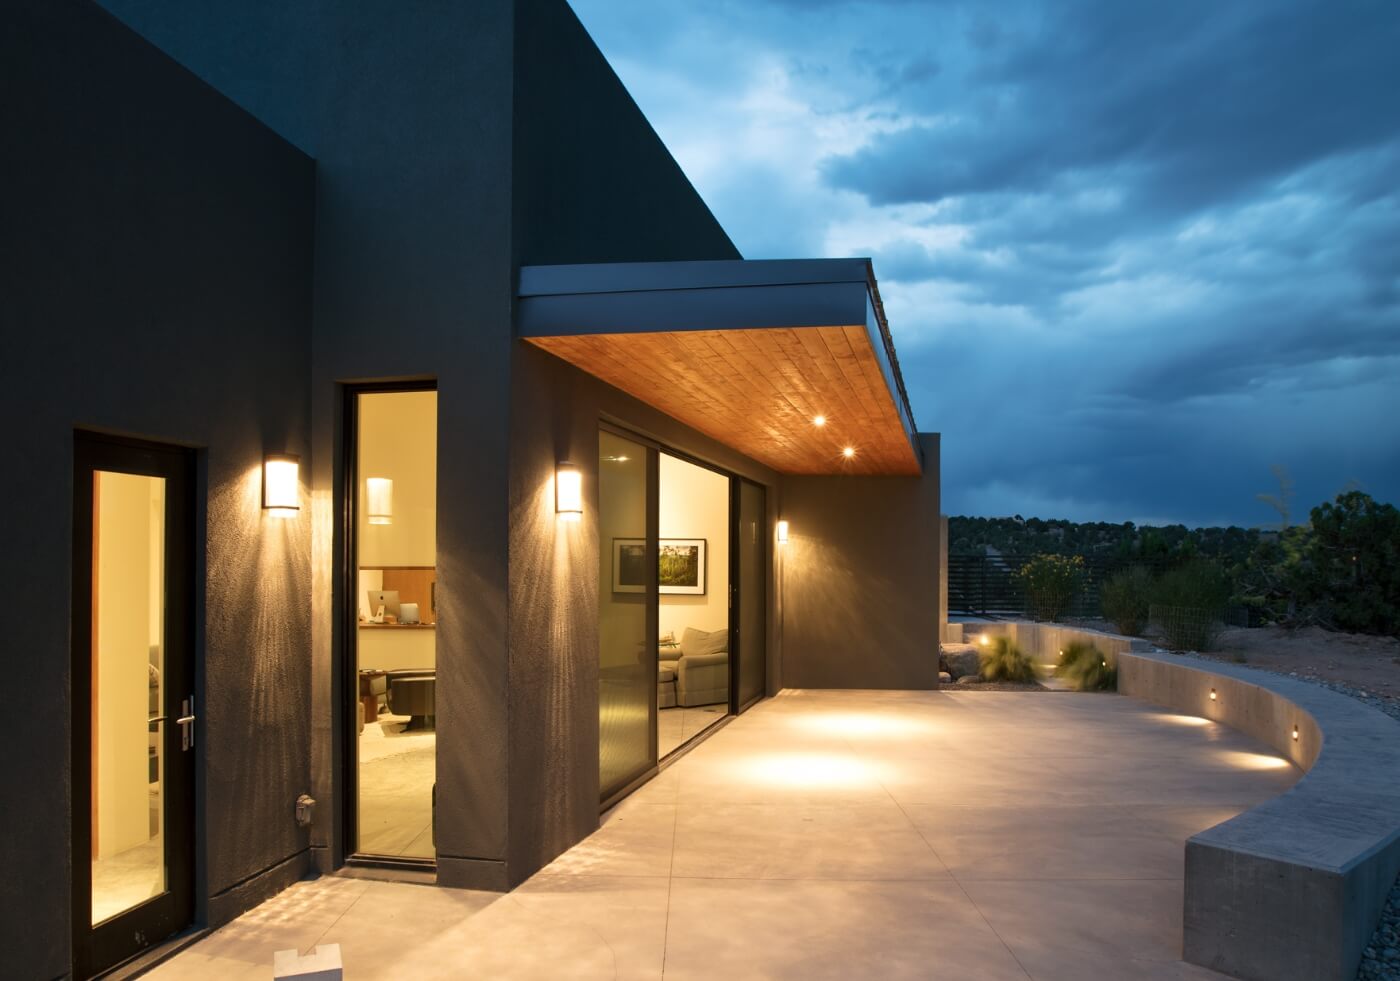 A Santa Fe style home is lit up at night.